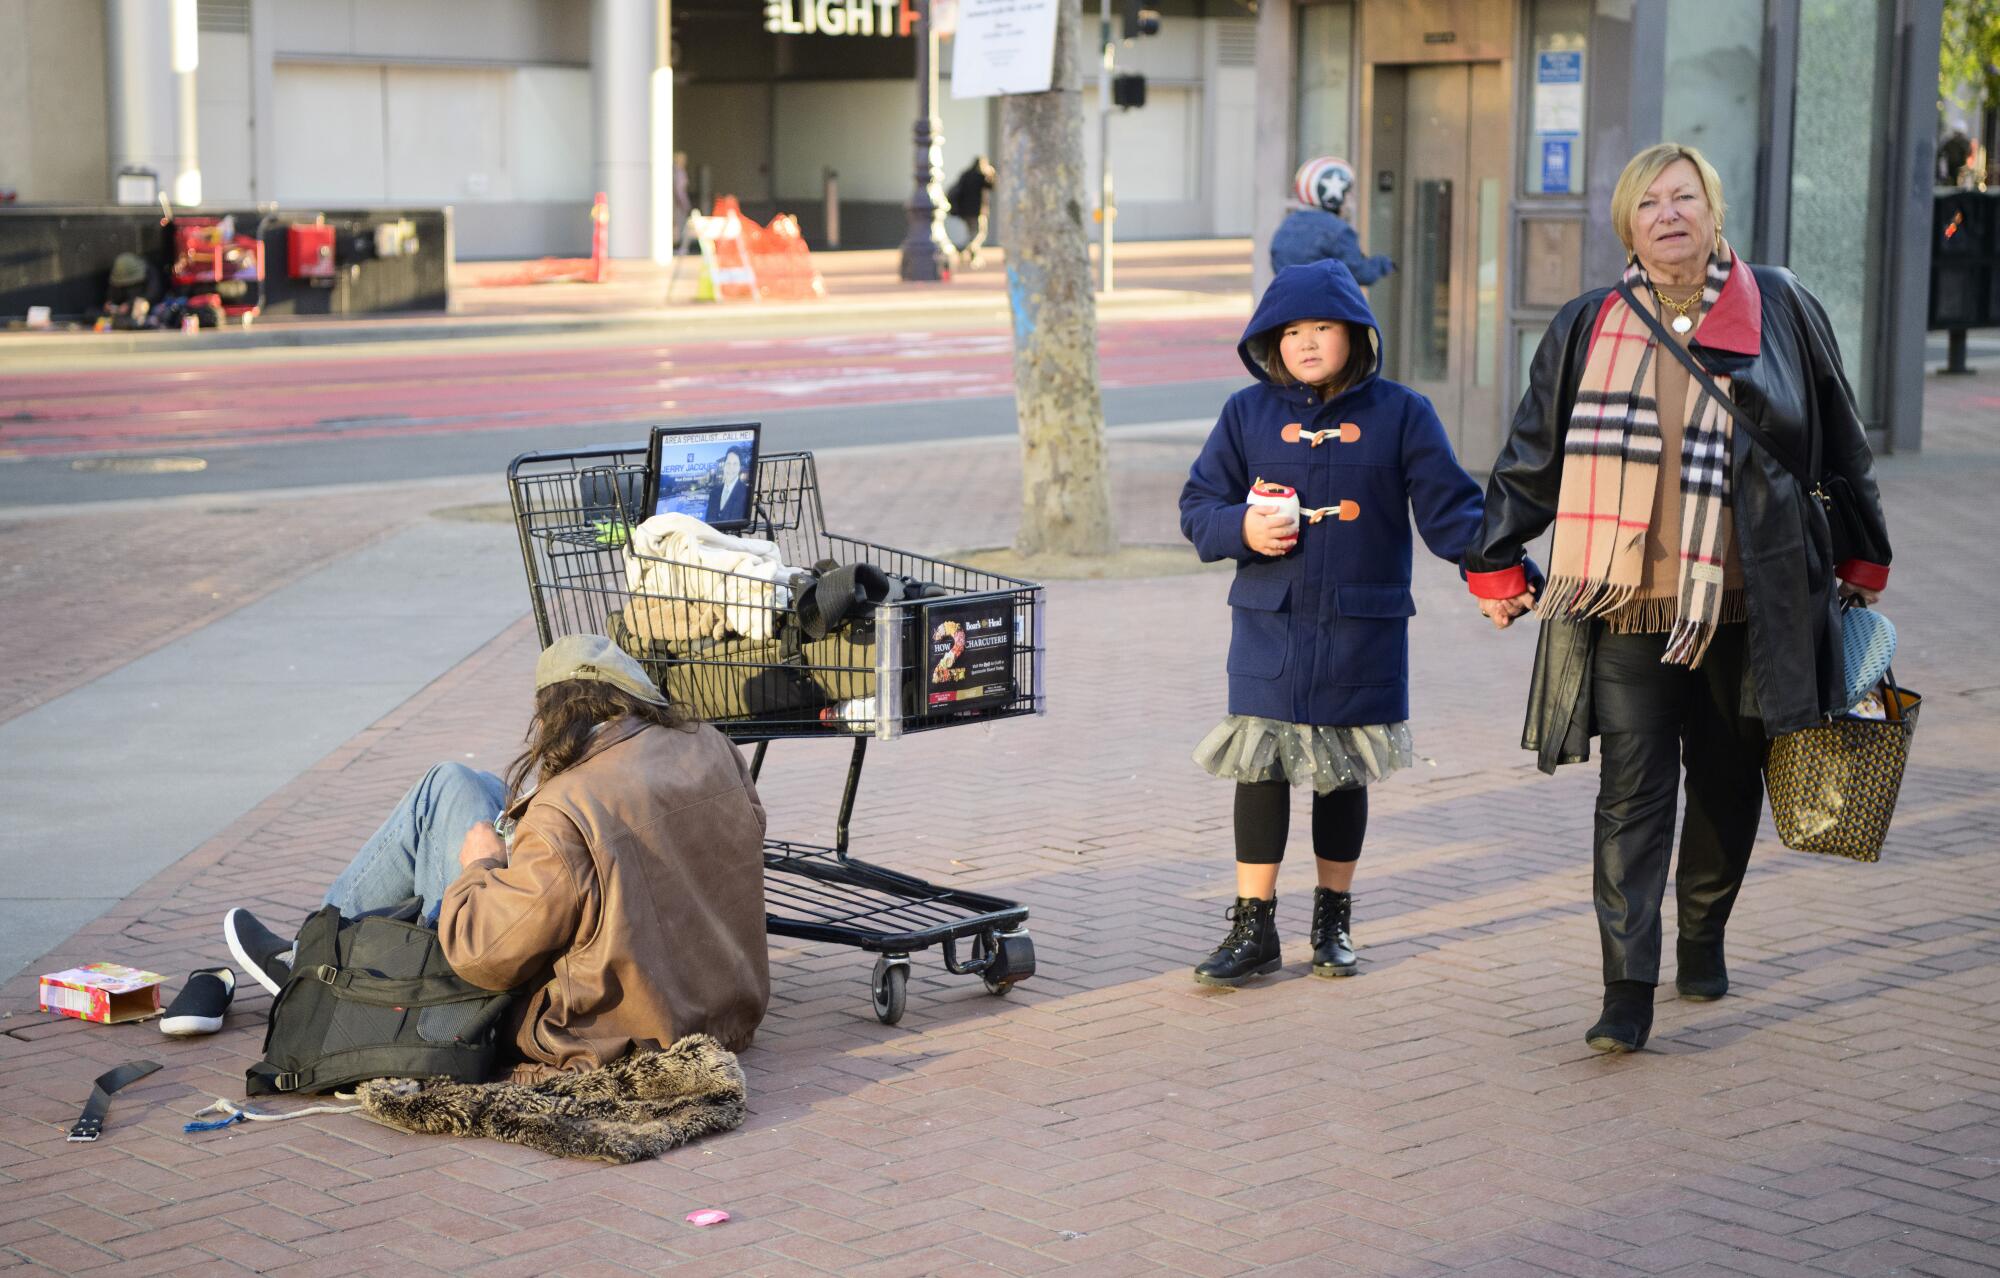 A woman and child walk passed a homeless drug user at UN Plaza in San Francisco.